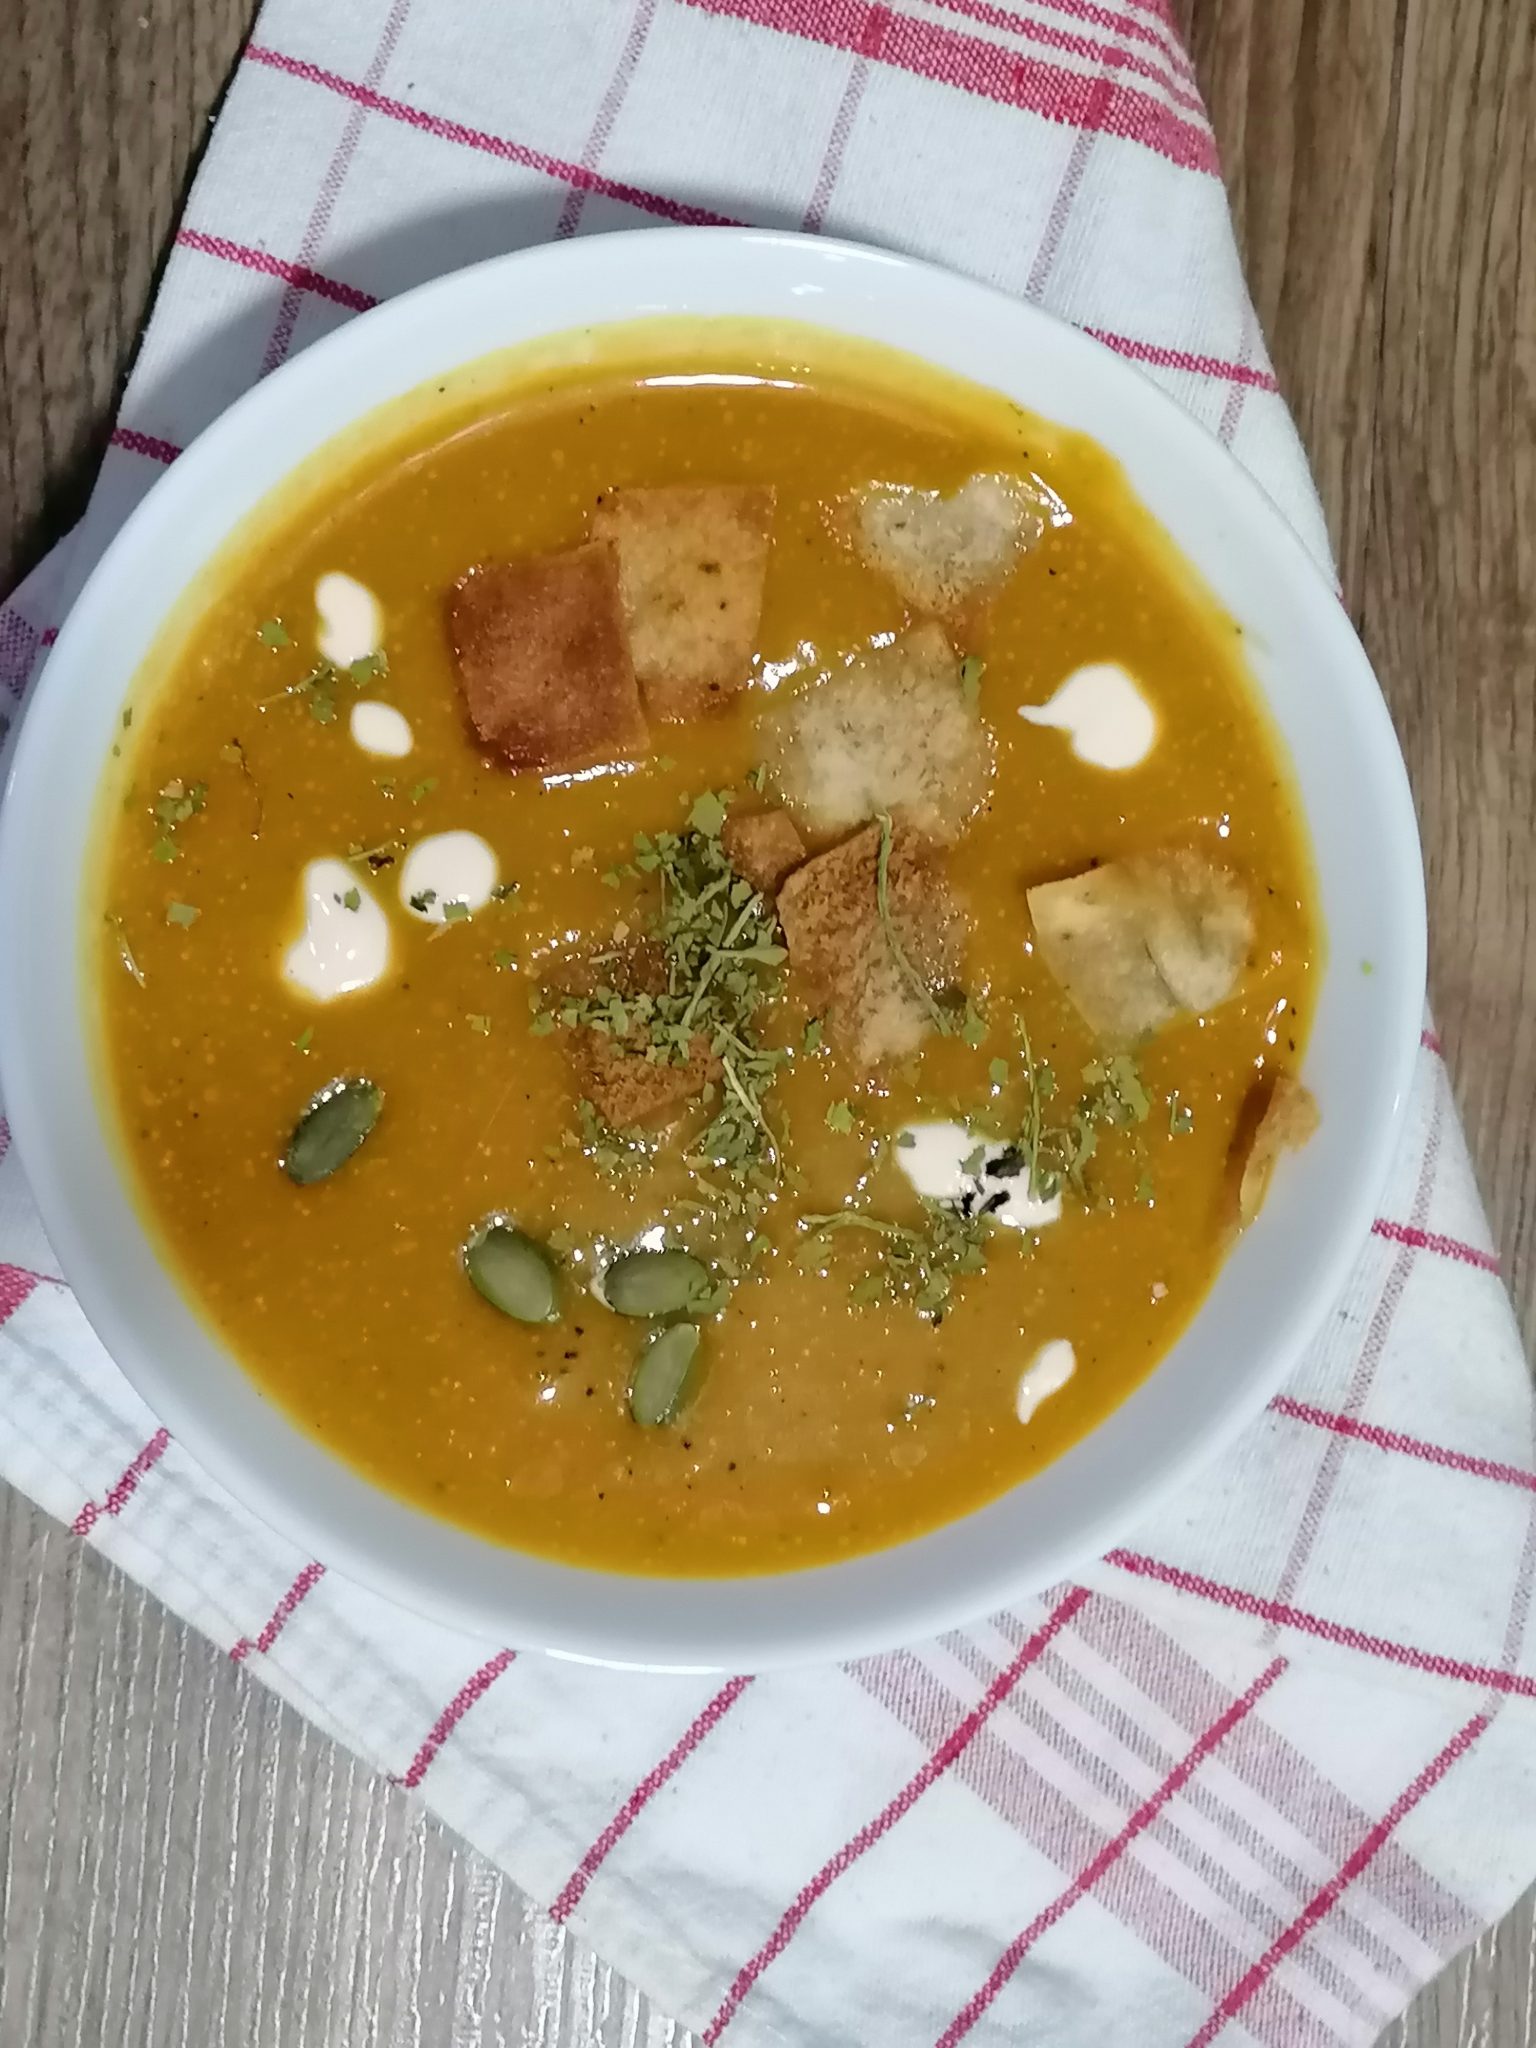 How to Cook Creamy Pumpkin Soup from Scratch